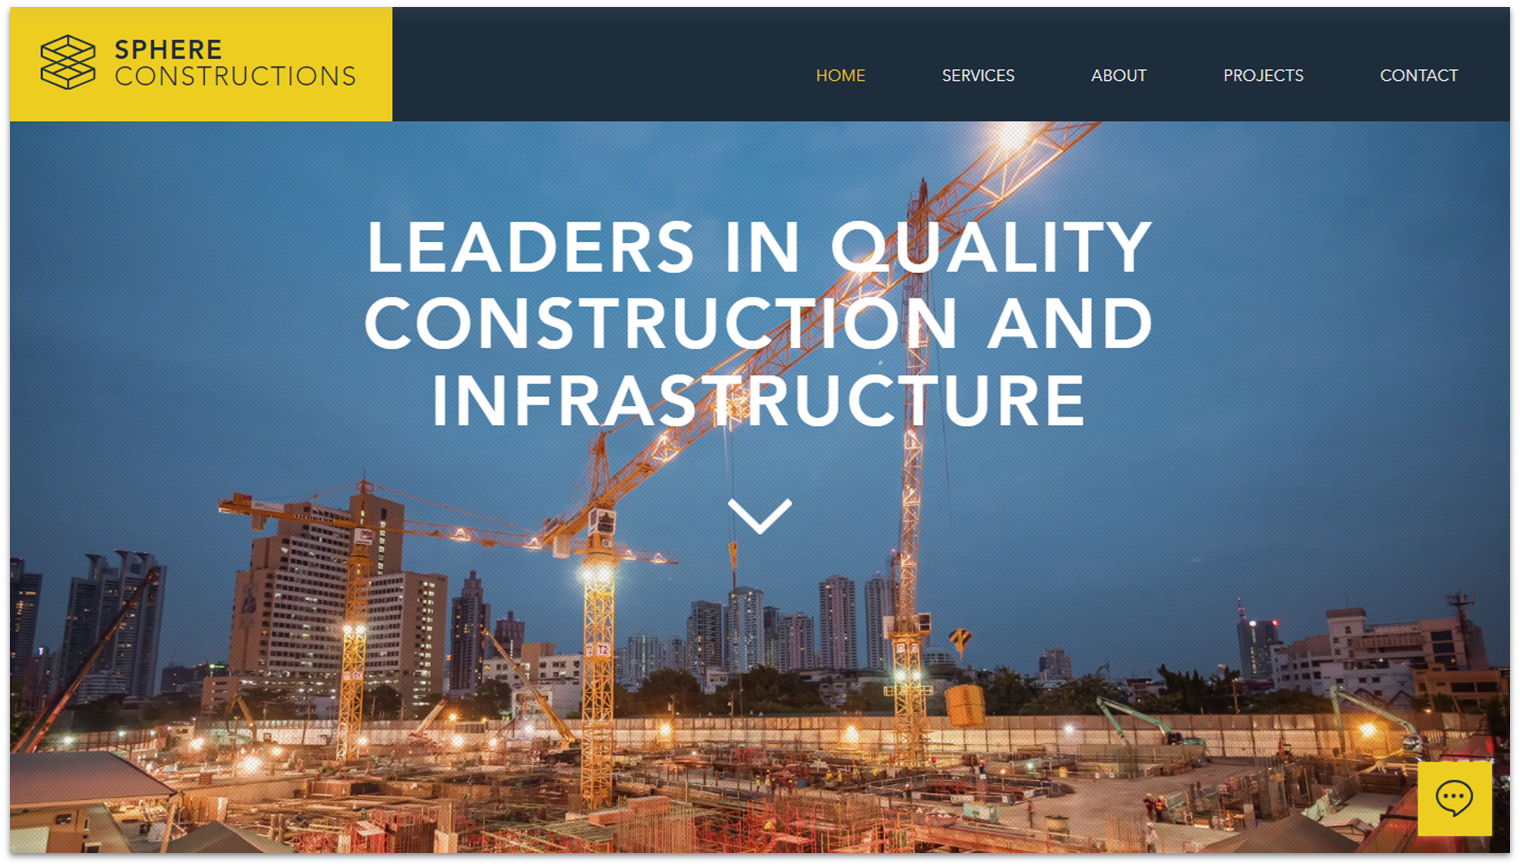 One of the Construction Company templates from Wix's library